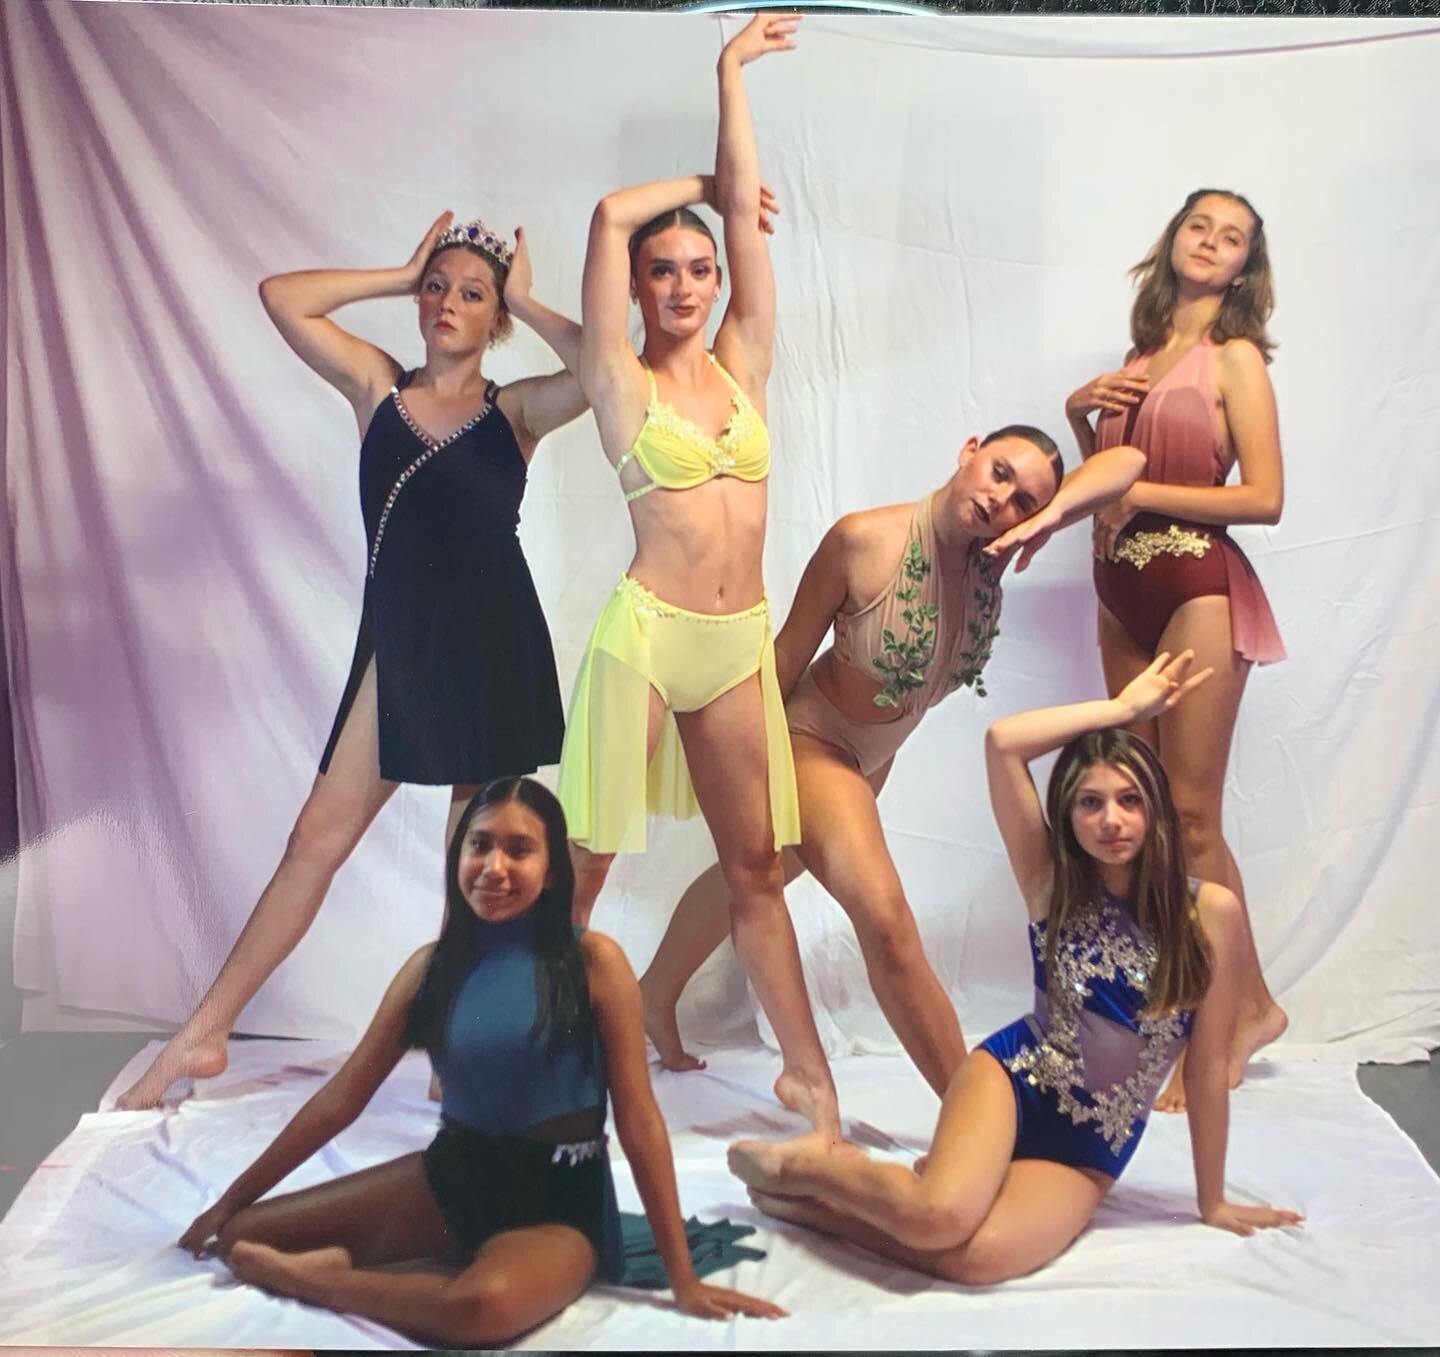 This picture of our teen division last fall ⭐️⭐️⭐️- taken with an IPHONE! They are just lovely! 

We love our teen division 💜

Spots available for Tuesday Teen classes for spring and summer online on our website thefamilydance.com

#teendance #semin